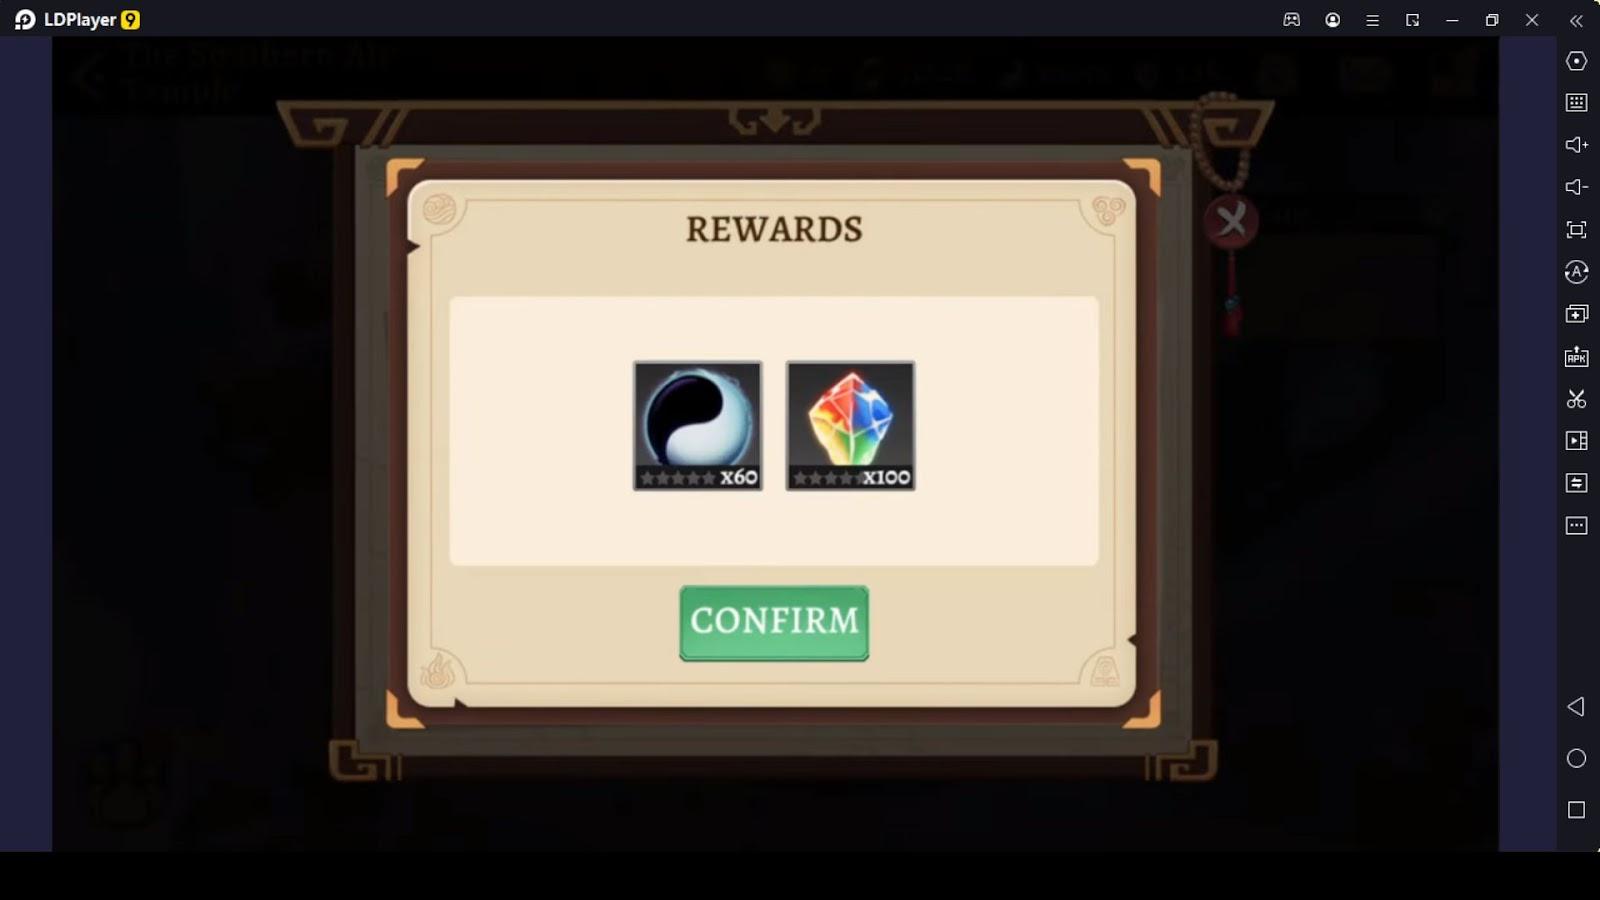 Take Use of Codes and Daily Rewards